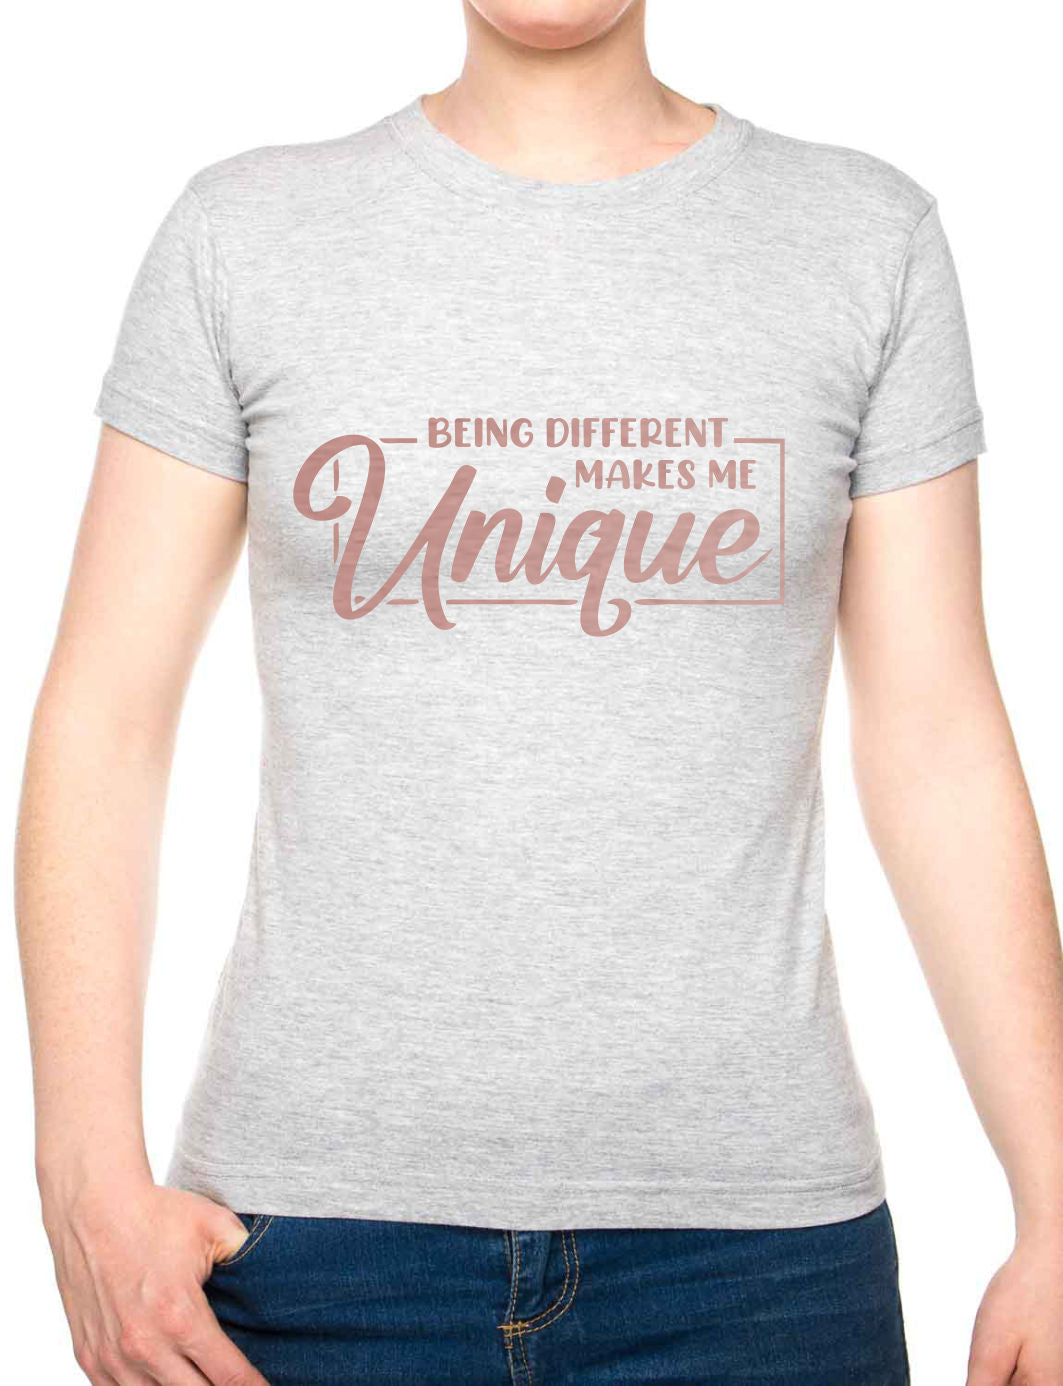 Being Different Makes Me Unique Metal Awareness Self Love Womens T-Shirt Tee